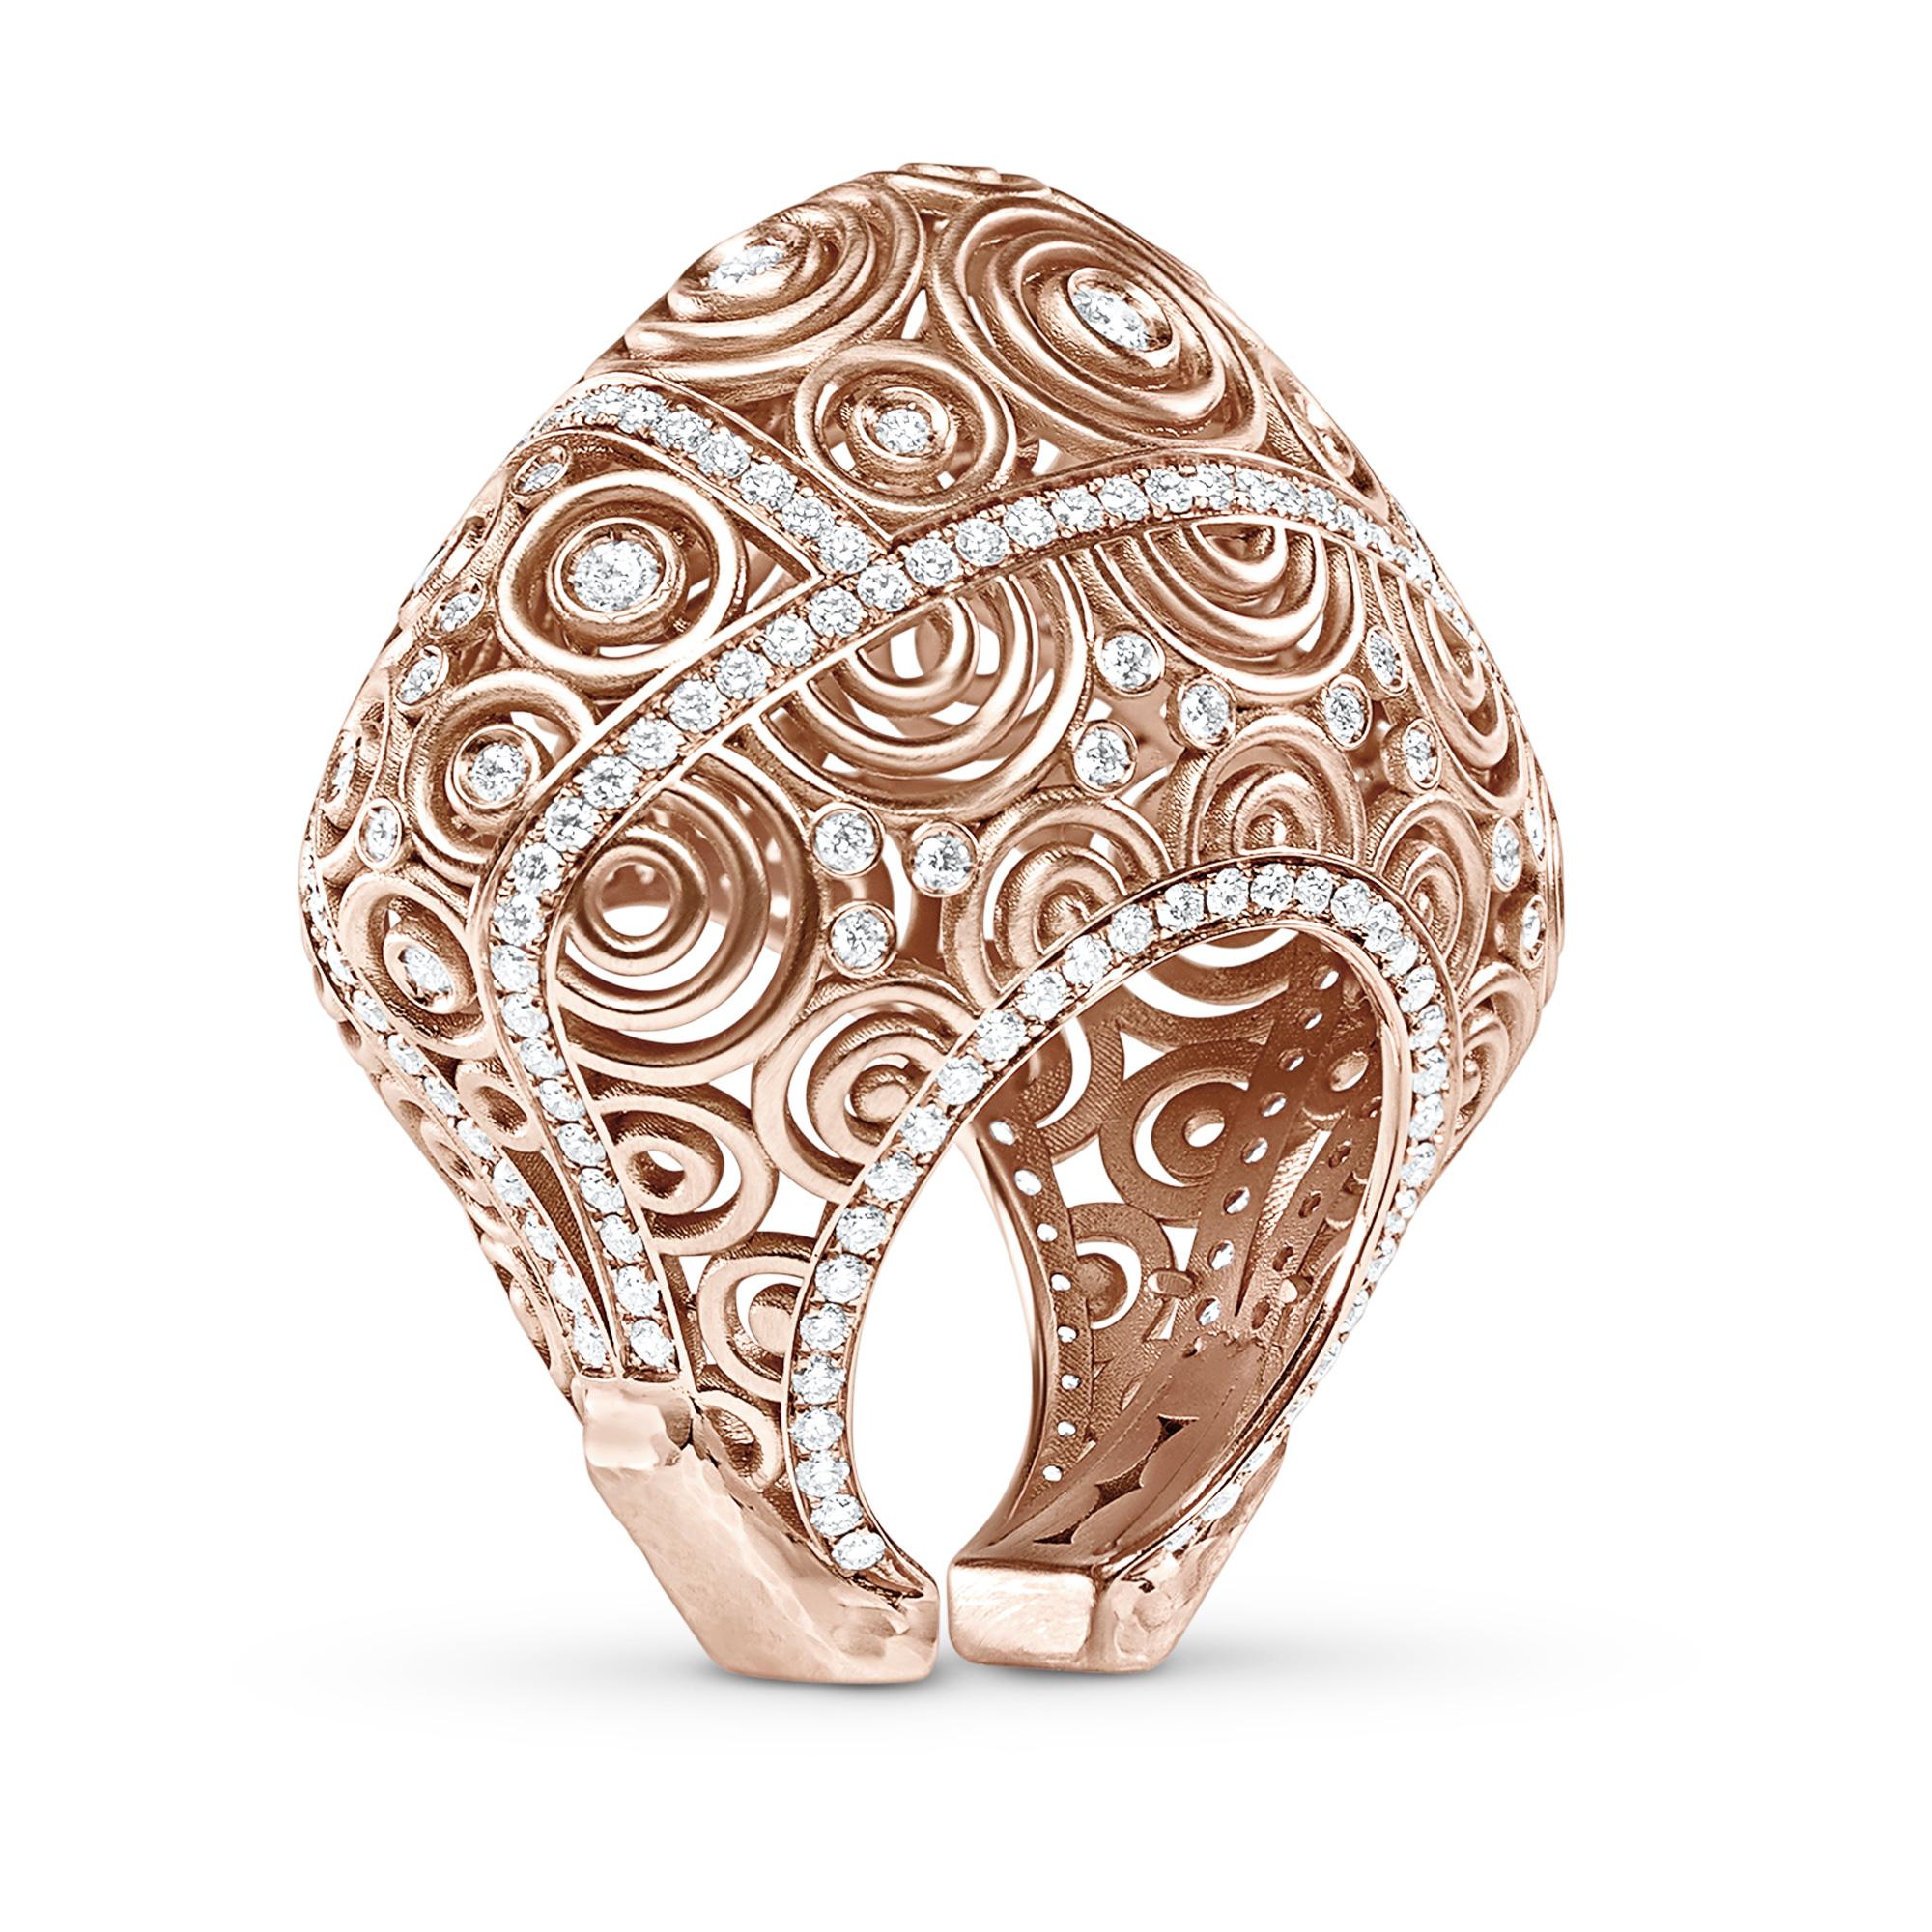 3.19 Carat Diamond 25 gr 18k Rose Gold Cocktail Ring

This magnificent ring is made of 18k rose gold, Set with 3.19 carats white GVS diamonds embedded within a series of architectural circles. Total gold weight: 25 grams.

Please contact us before